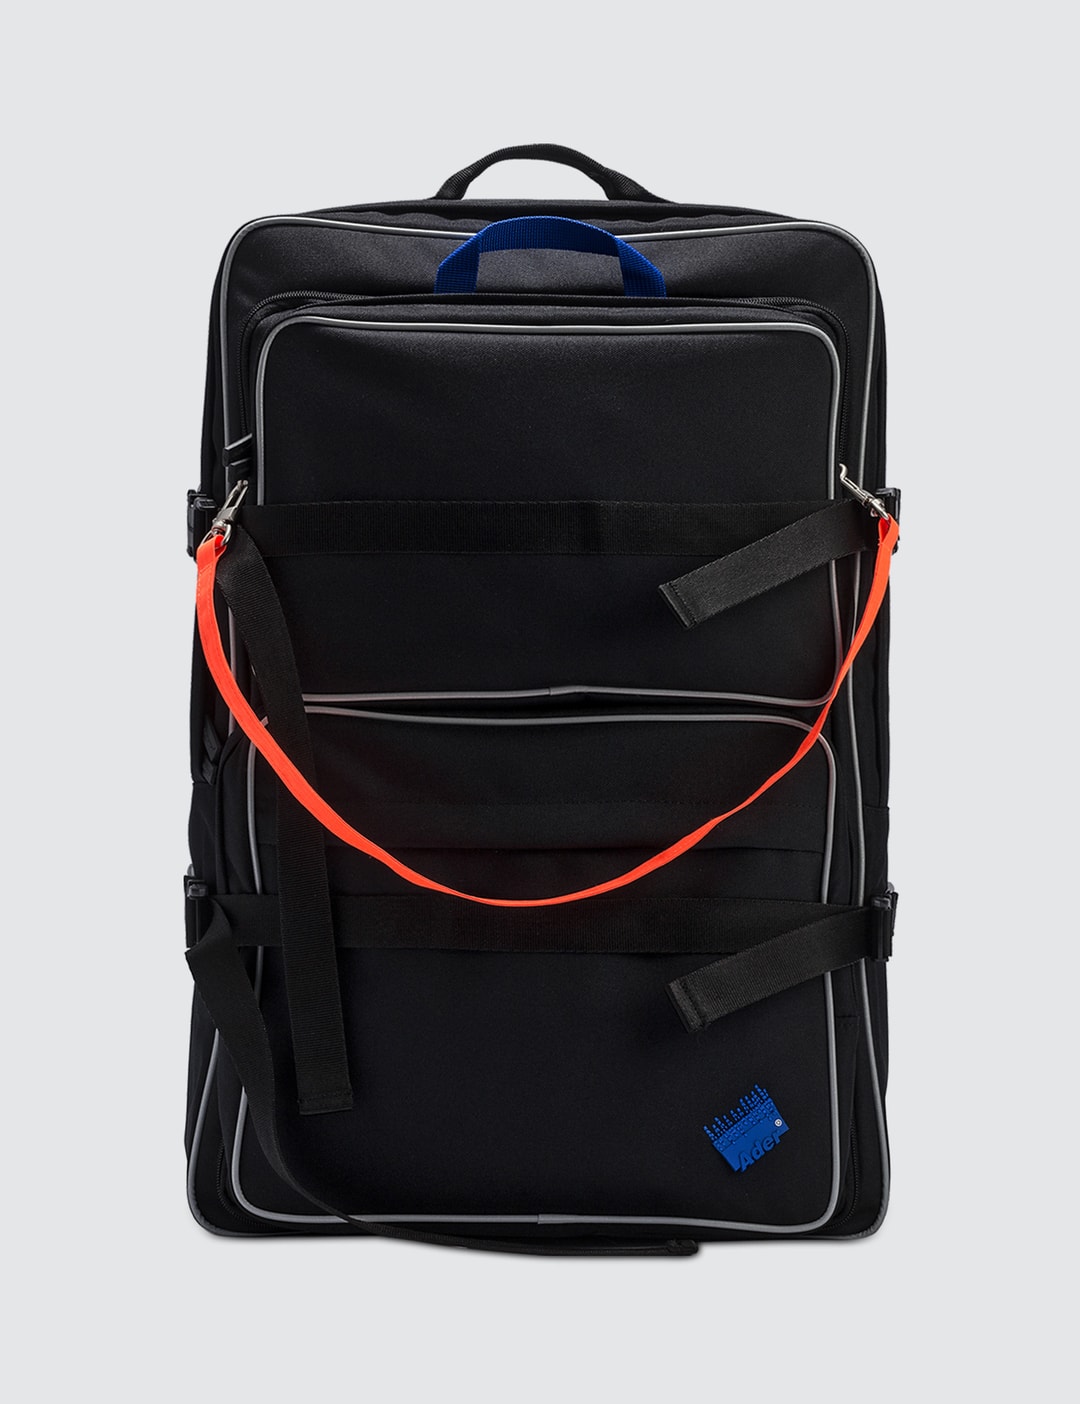 Ader Error - Backpack | HBX - Globally Curated Fashion and Lifestyle by ...